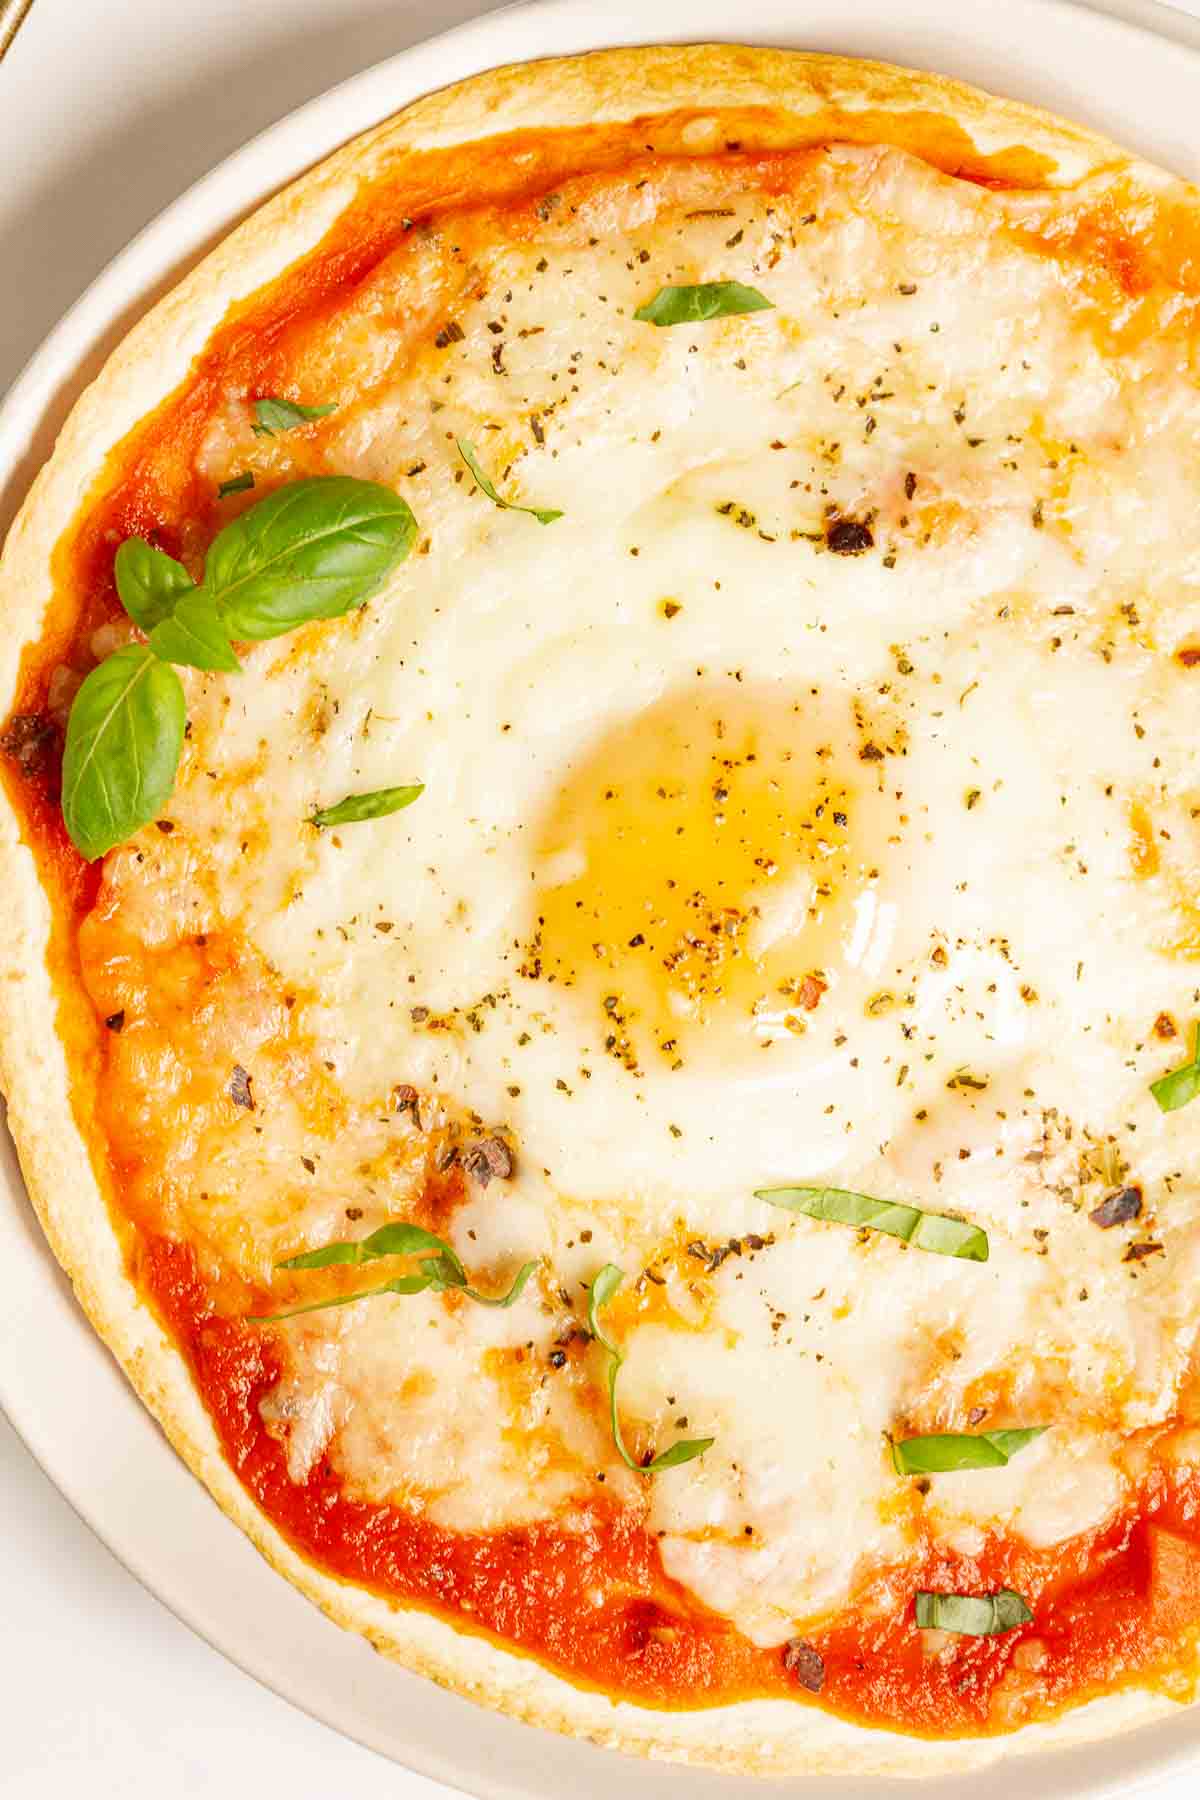 Breakfast tortilla pizza with a runny egg